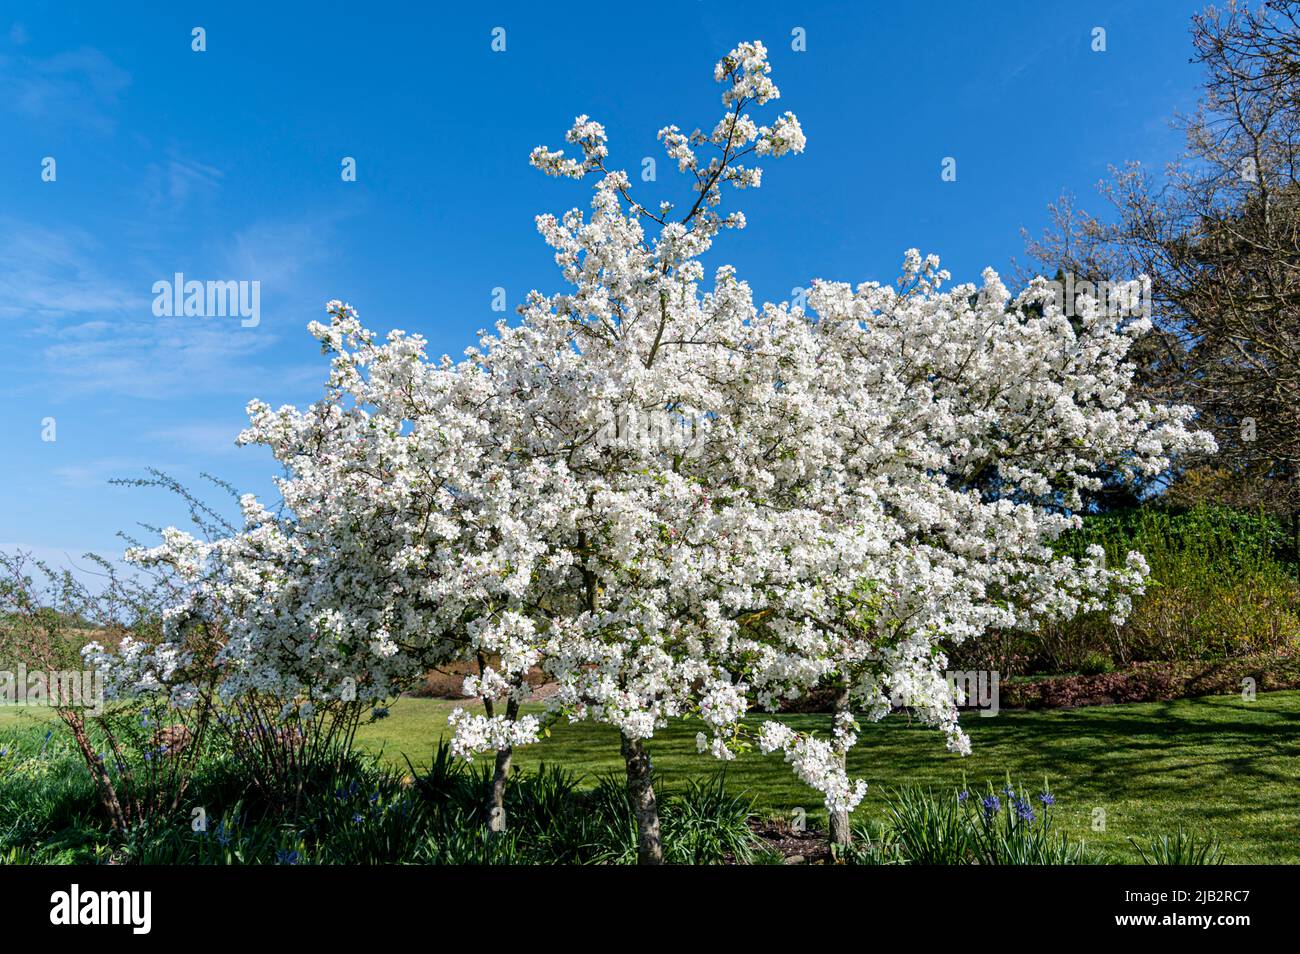 Malus Evereste, crab apple Evereste, Malus Perpetu, Rosaceae.White flowers or blossom in abundance on this showy tree. Stock Photo